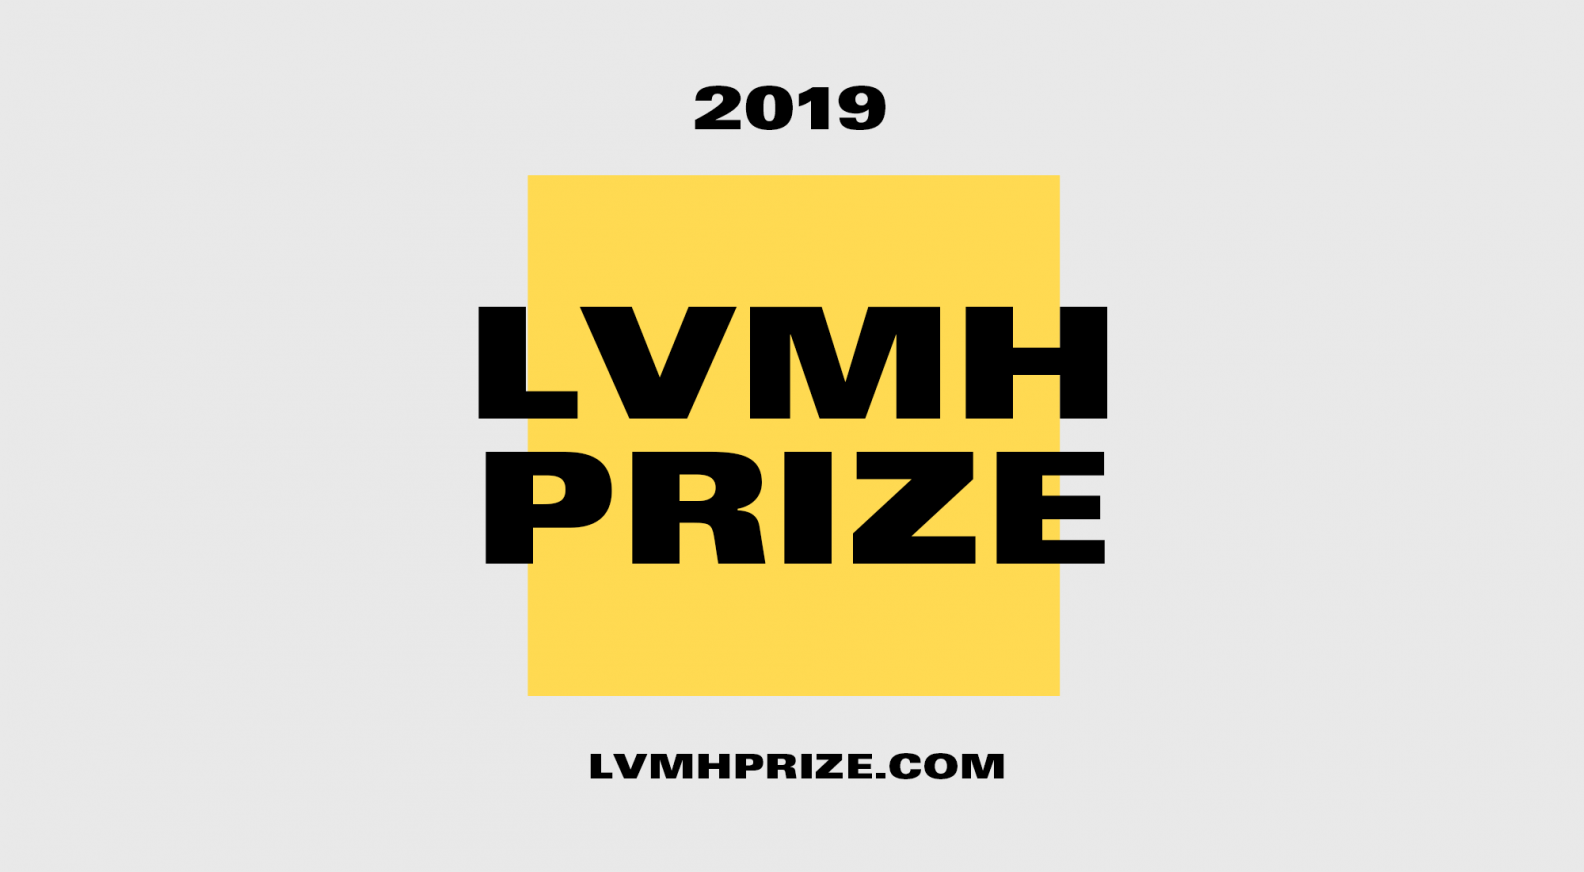 Page 11 - Letter to shareholders – March 2019 - LVMH